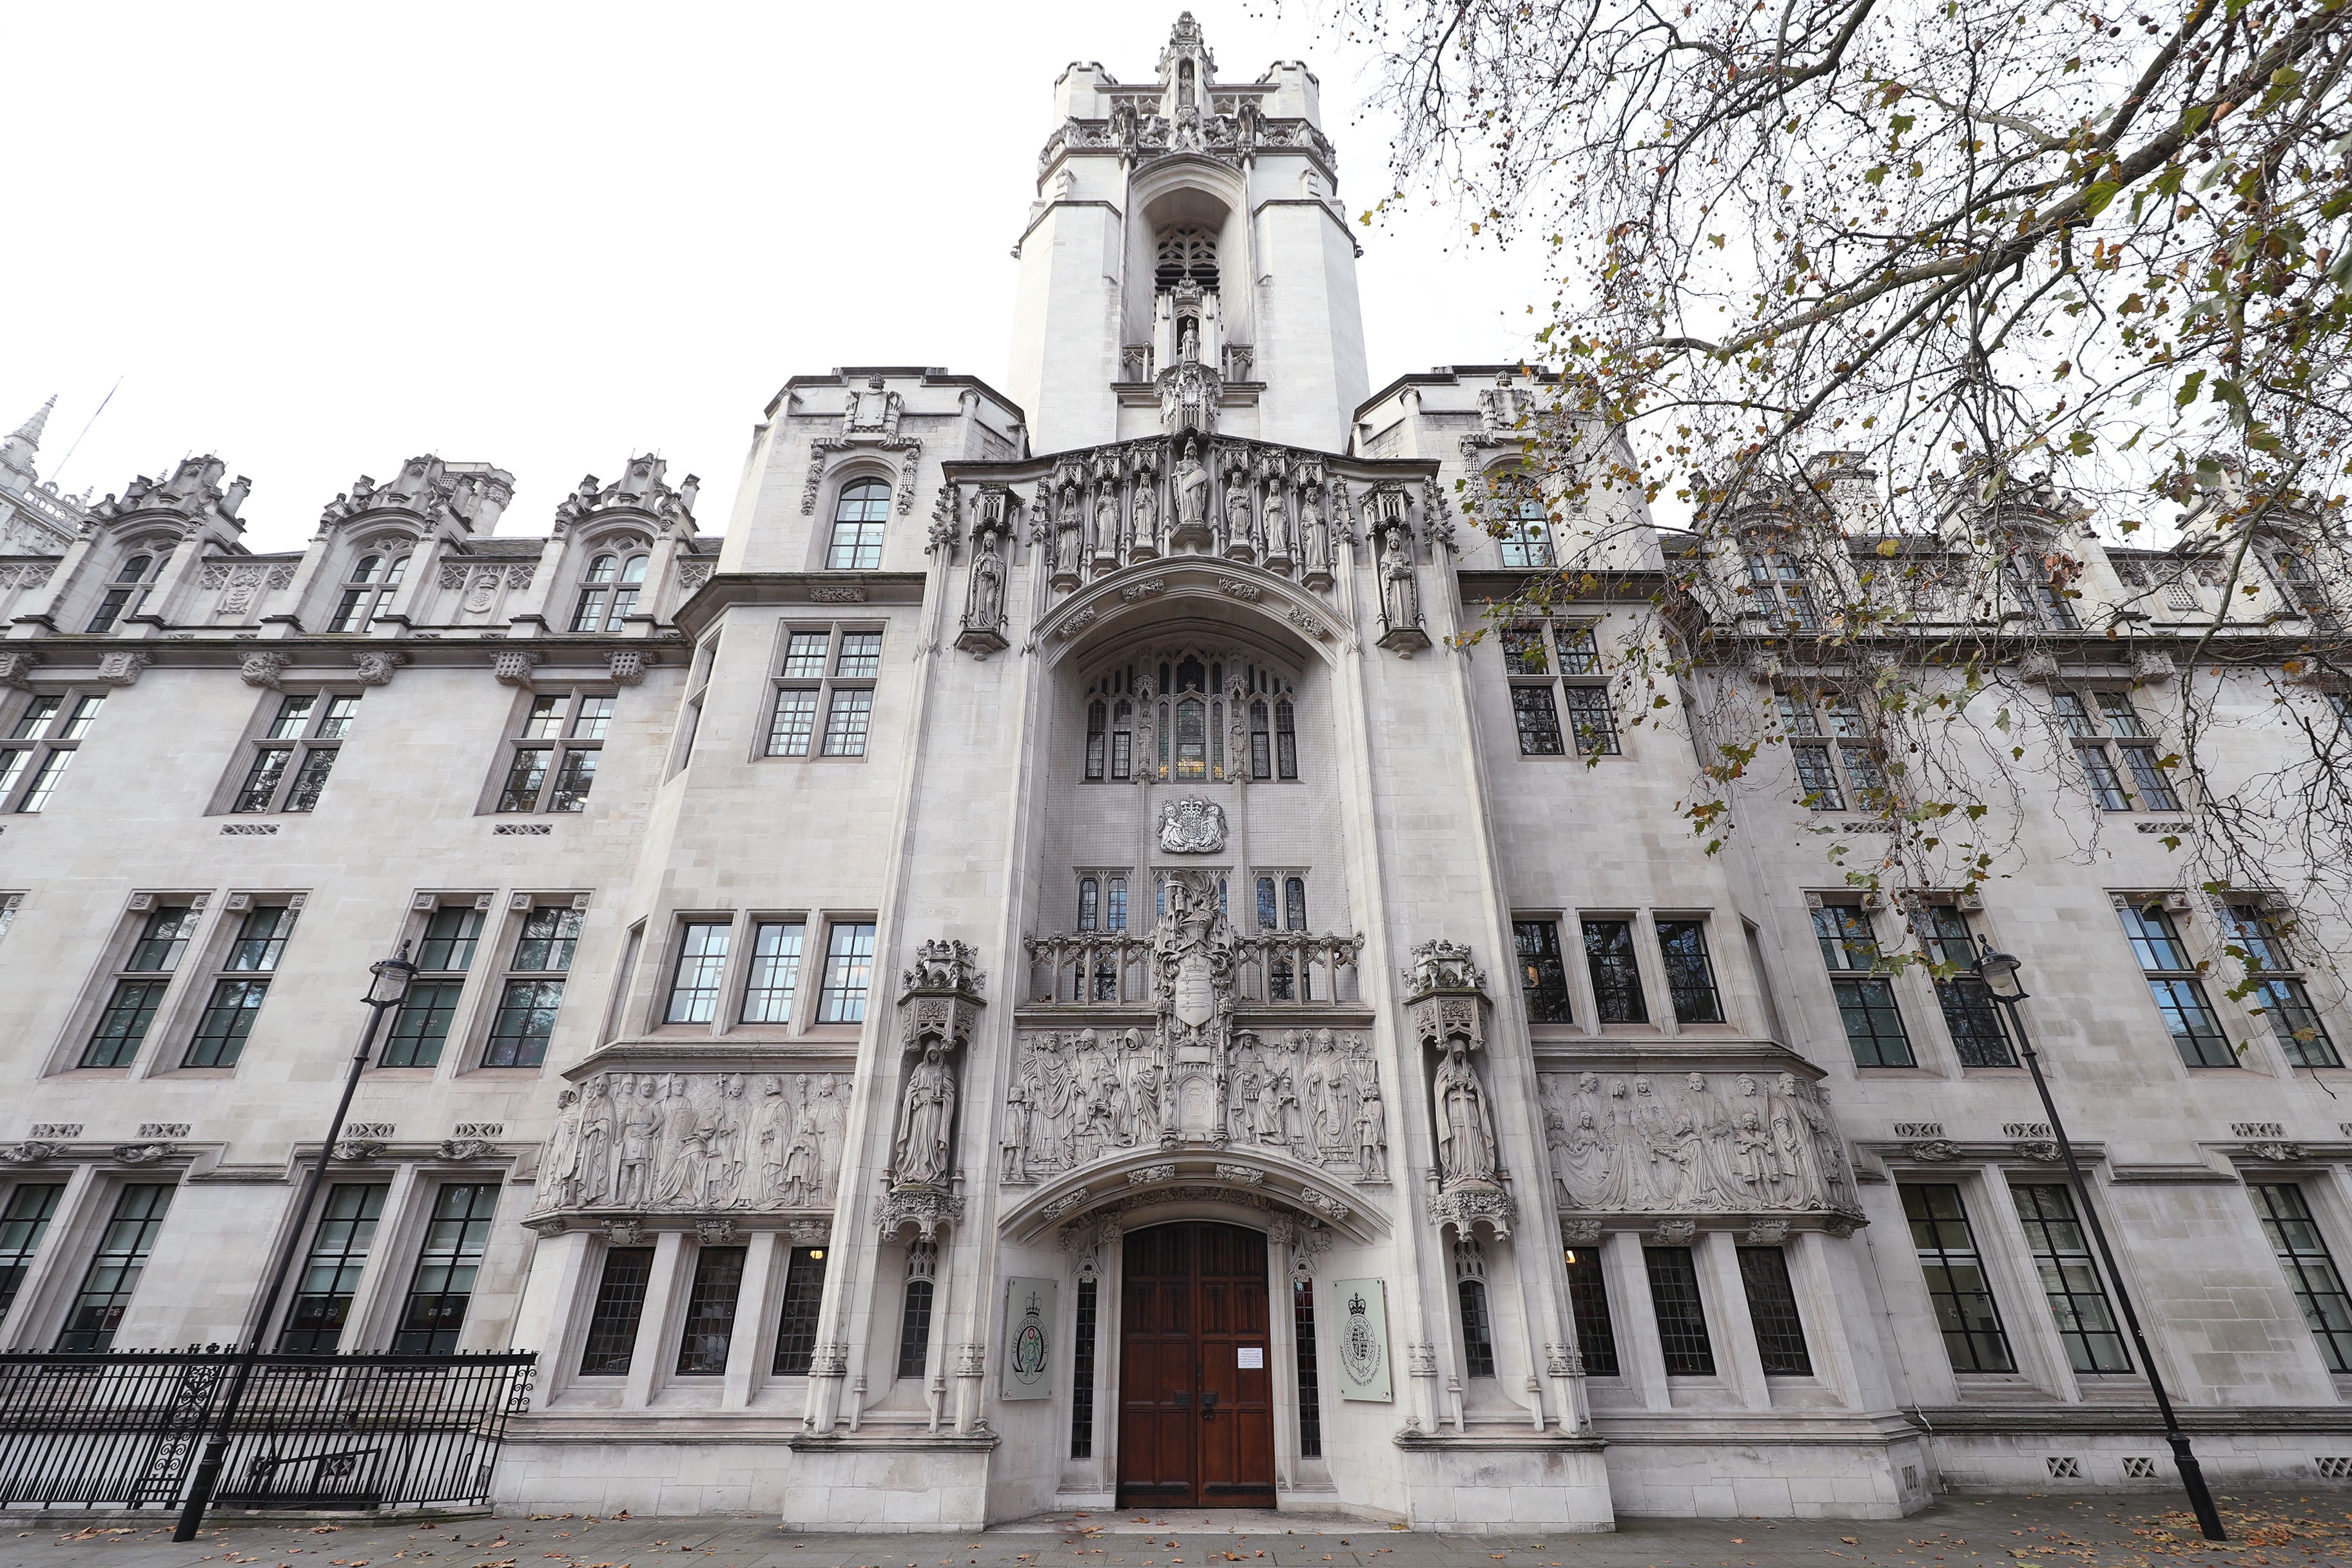 A three-day hearing will be held at the UK Supreme Court